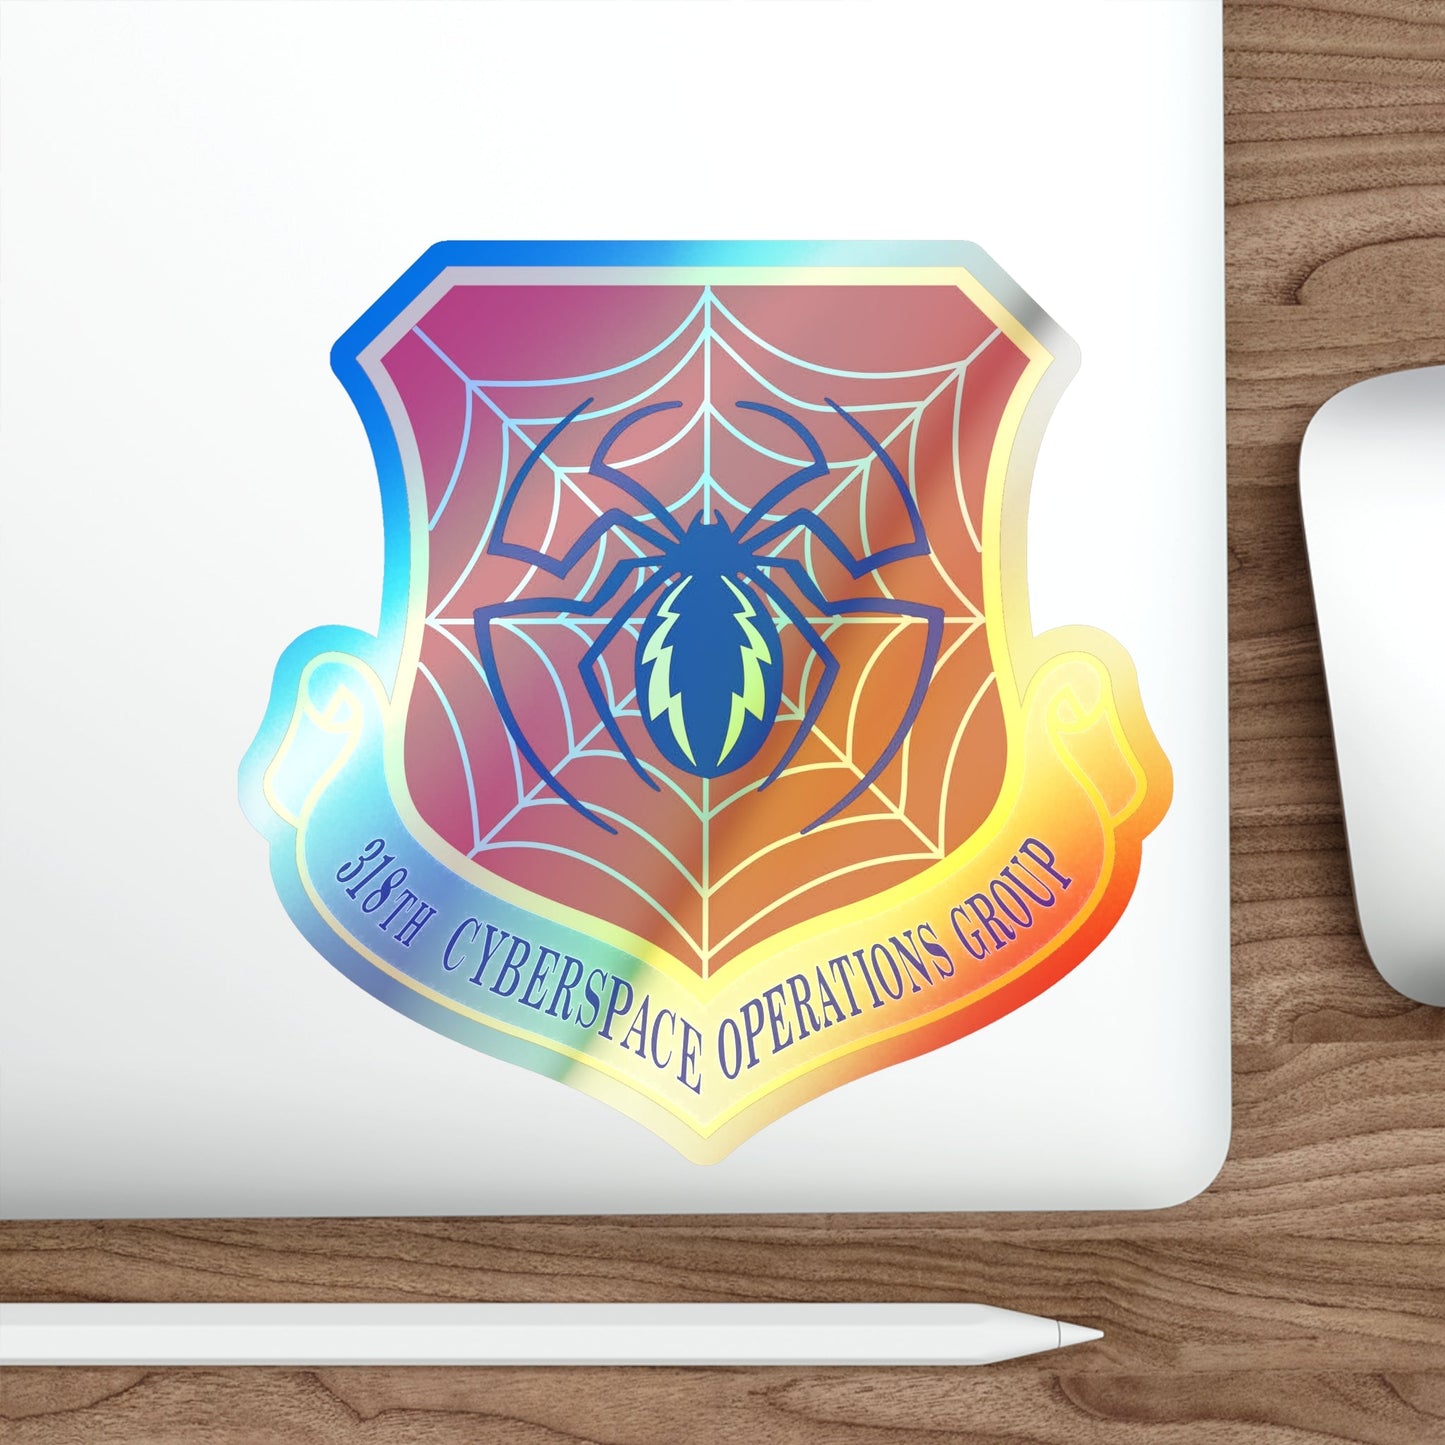 318 Cyberspace Operations Group ACC (U.S. Air Force) Holographic STICKER Die-Cut Vinyl Decal-The Sticker Space